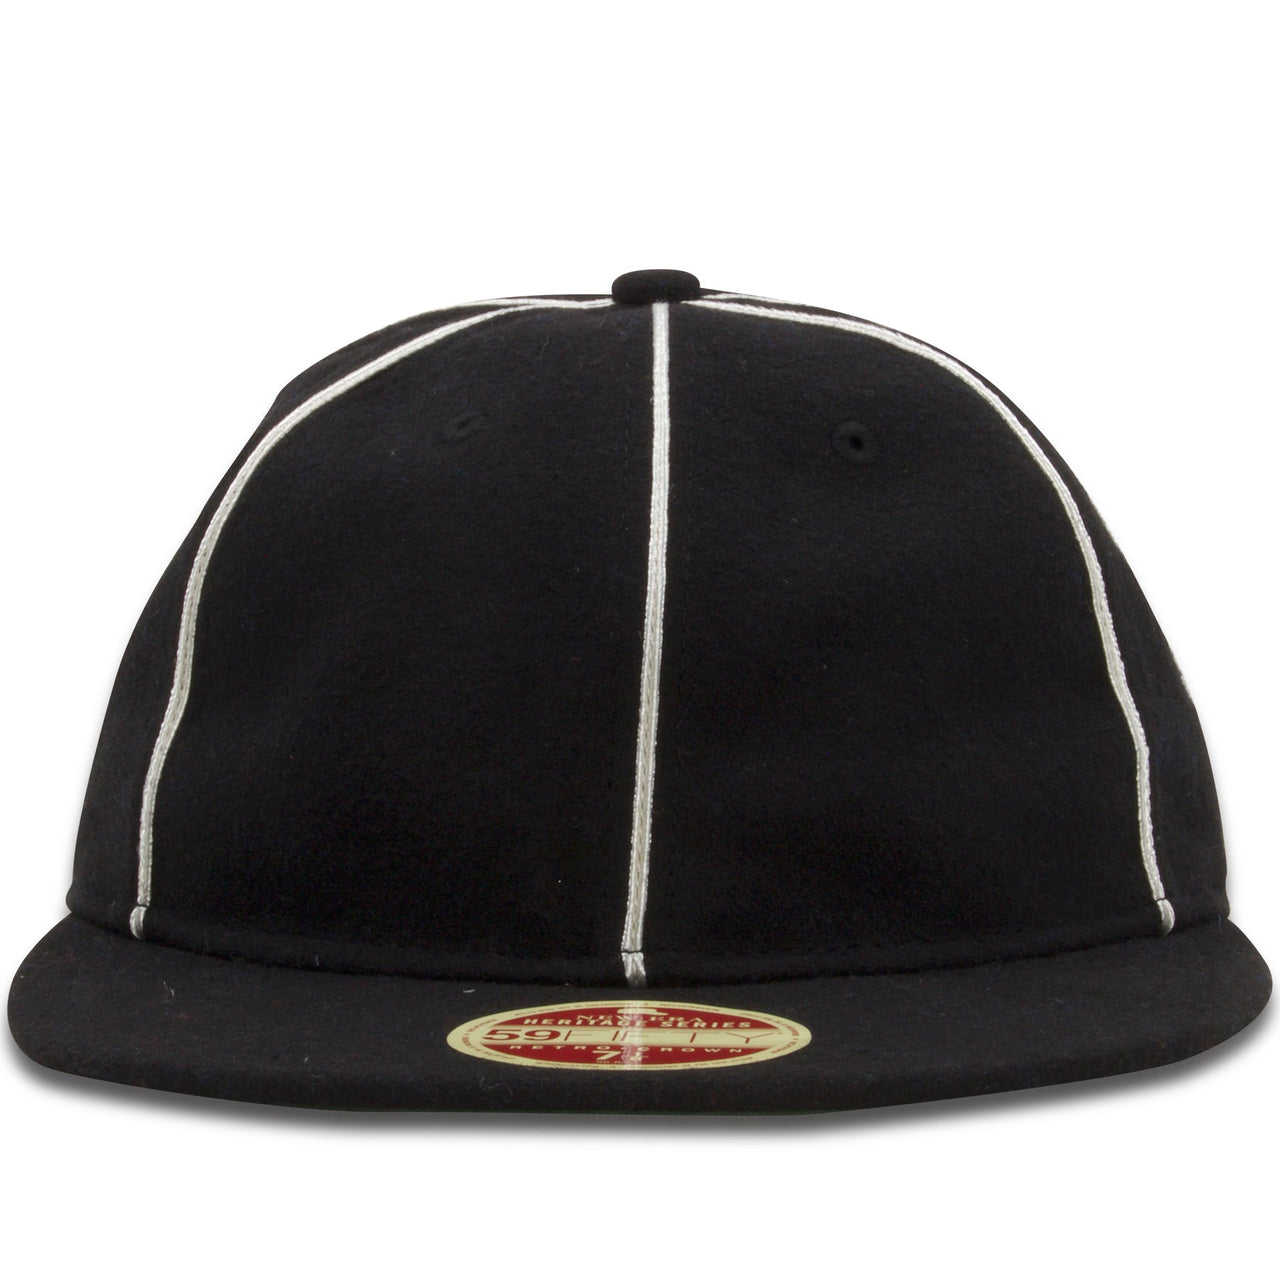 The Philadelphia Phillies 1903 Heritage Series Black 59Fifty Fitted Cap features a wool-like material and a very simple construction with a retro crown that'll help you rep the Phillies in the most authentic way